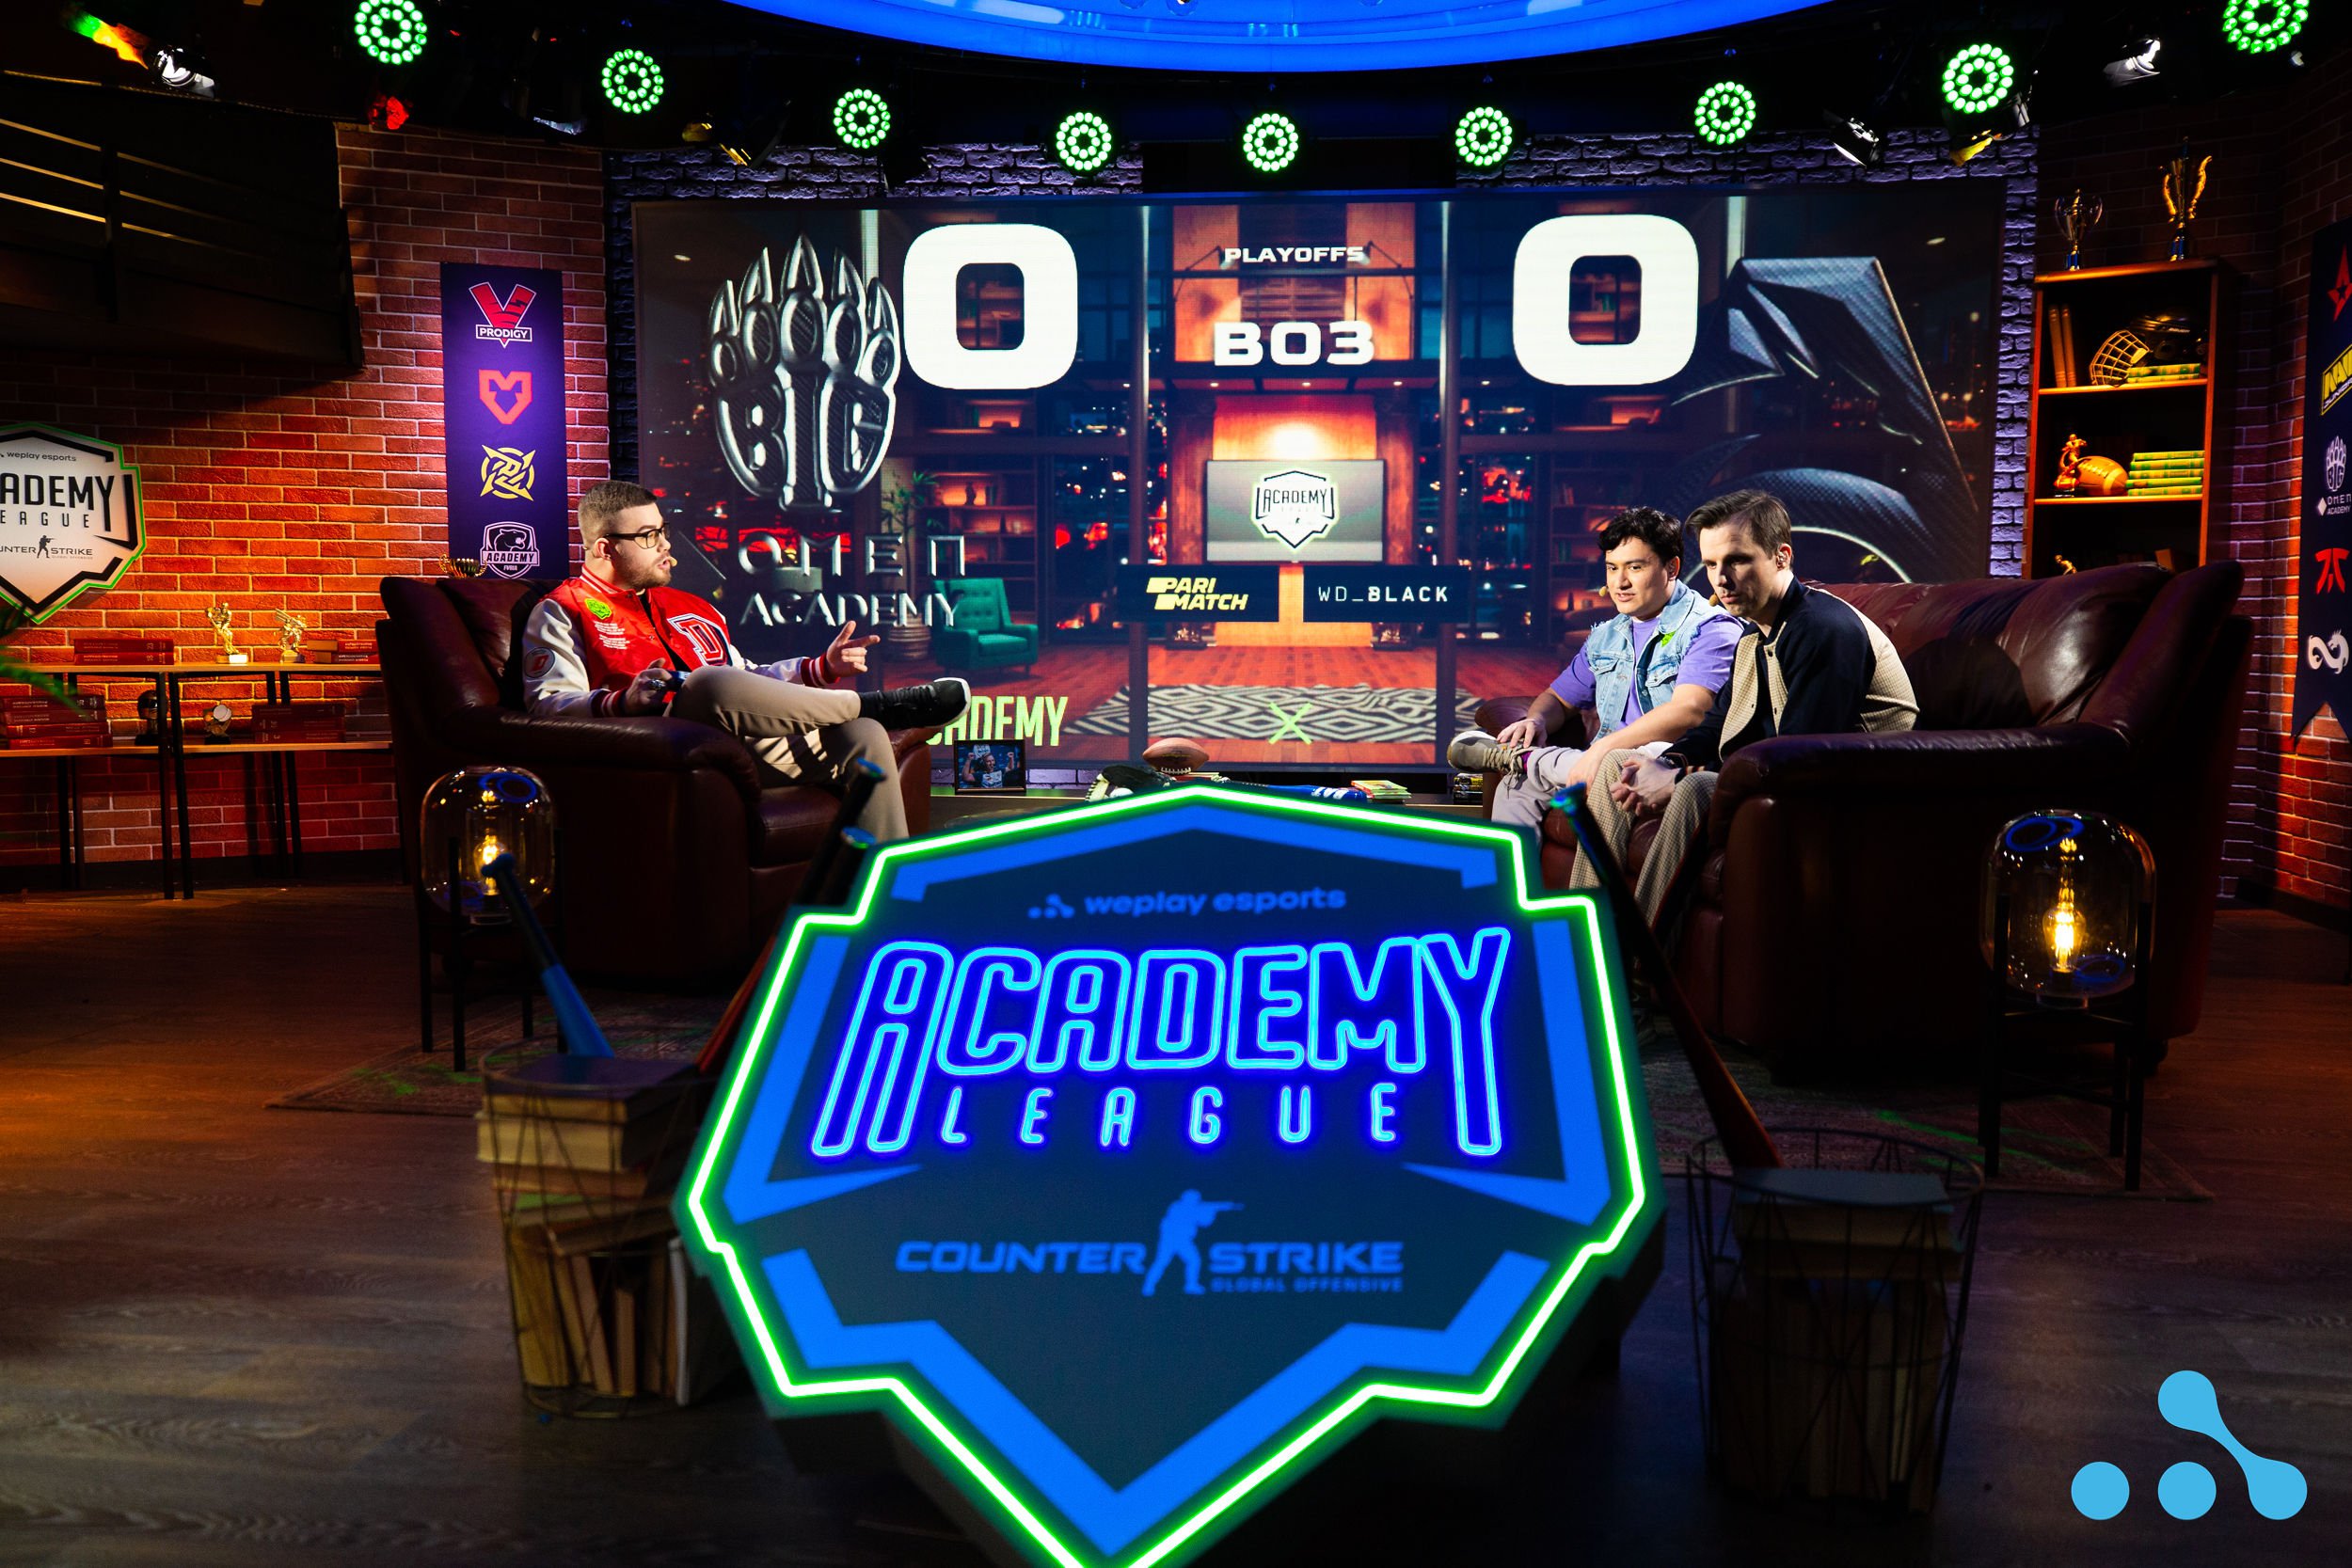 Playoff stage of WePlay Academy League Season 3. Photo: WePlay Holding